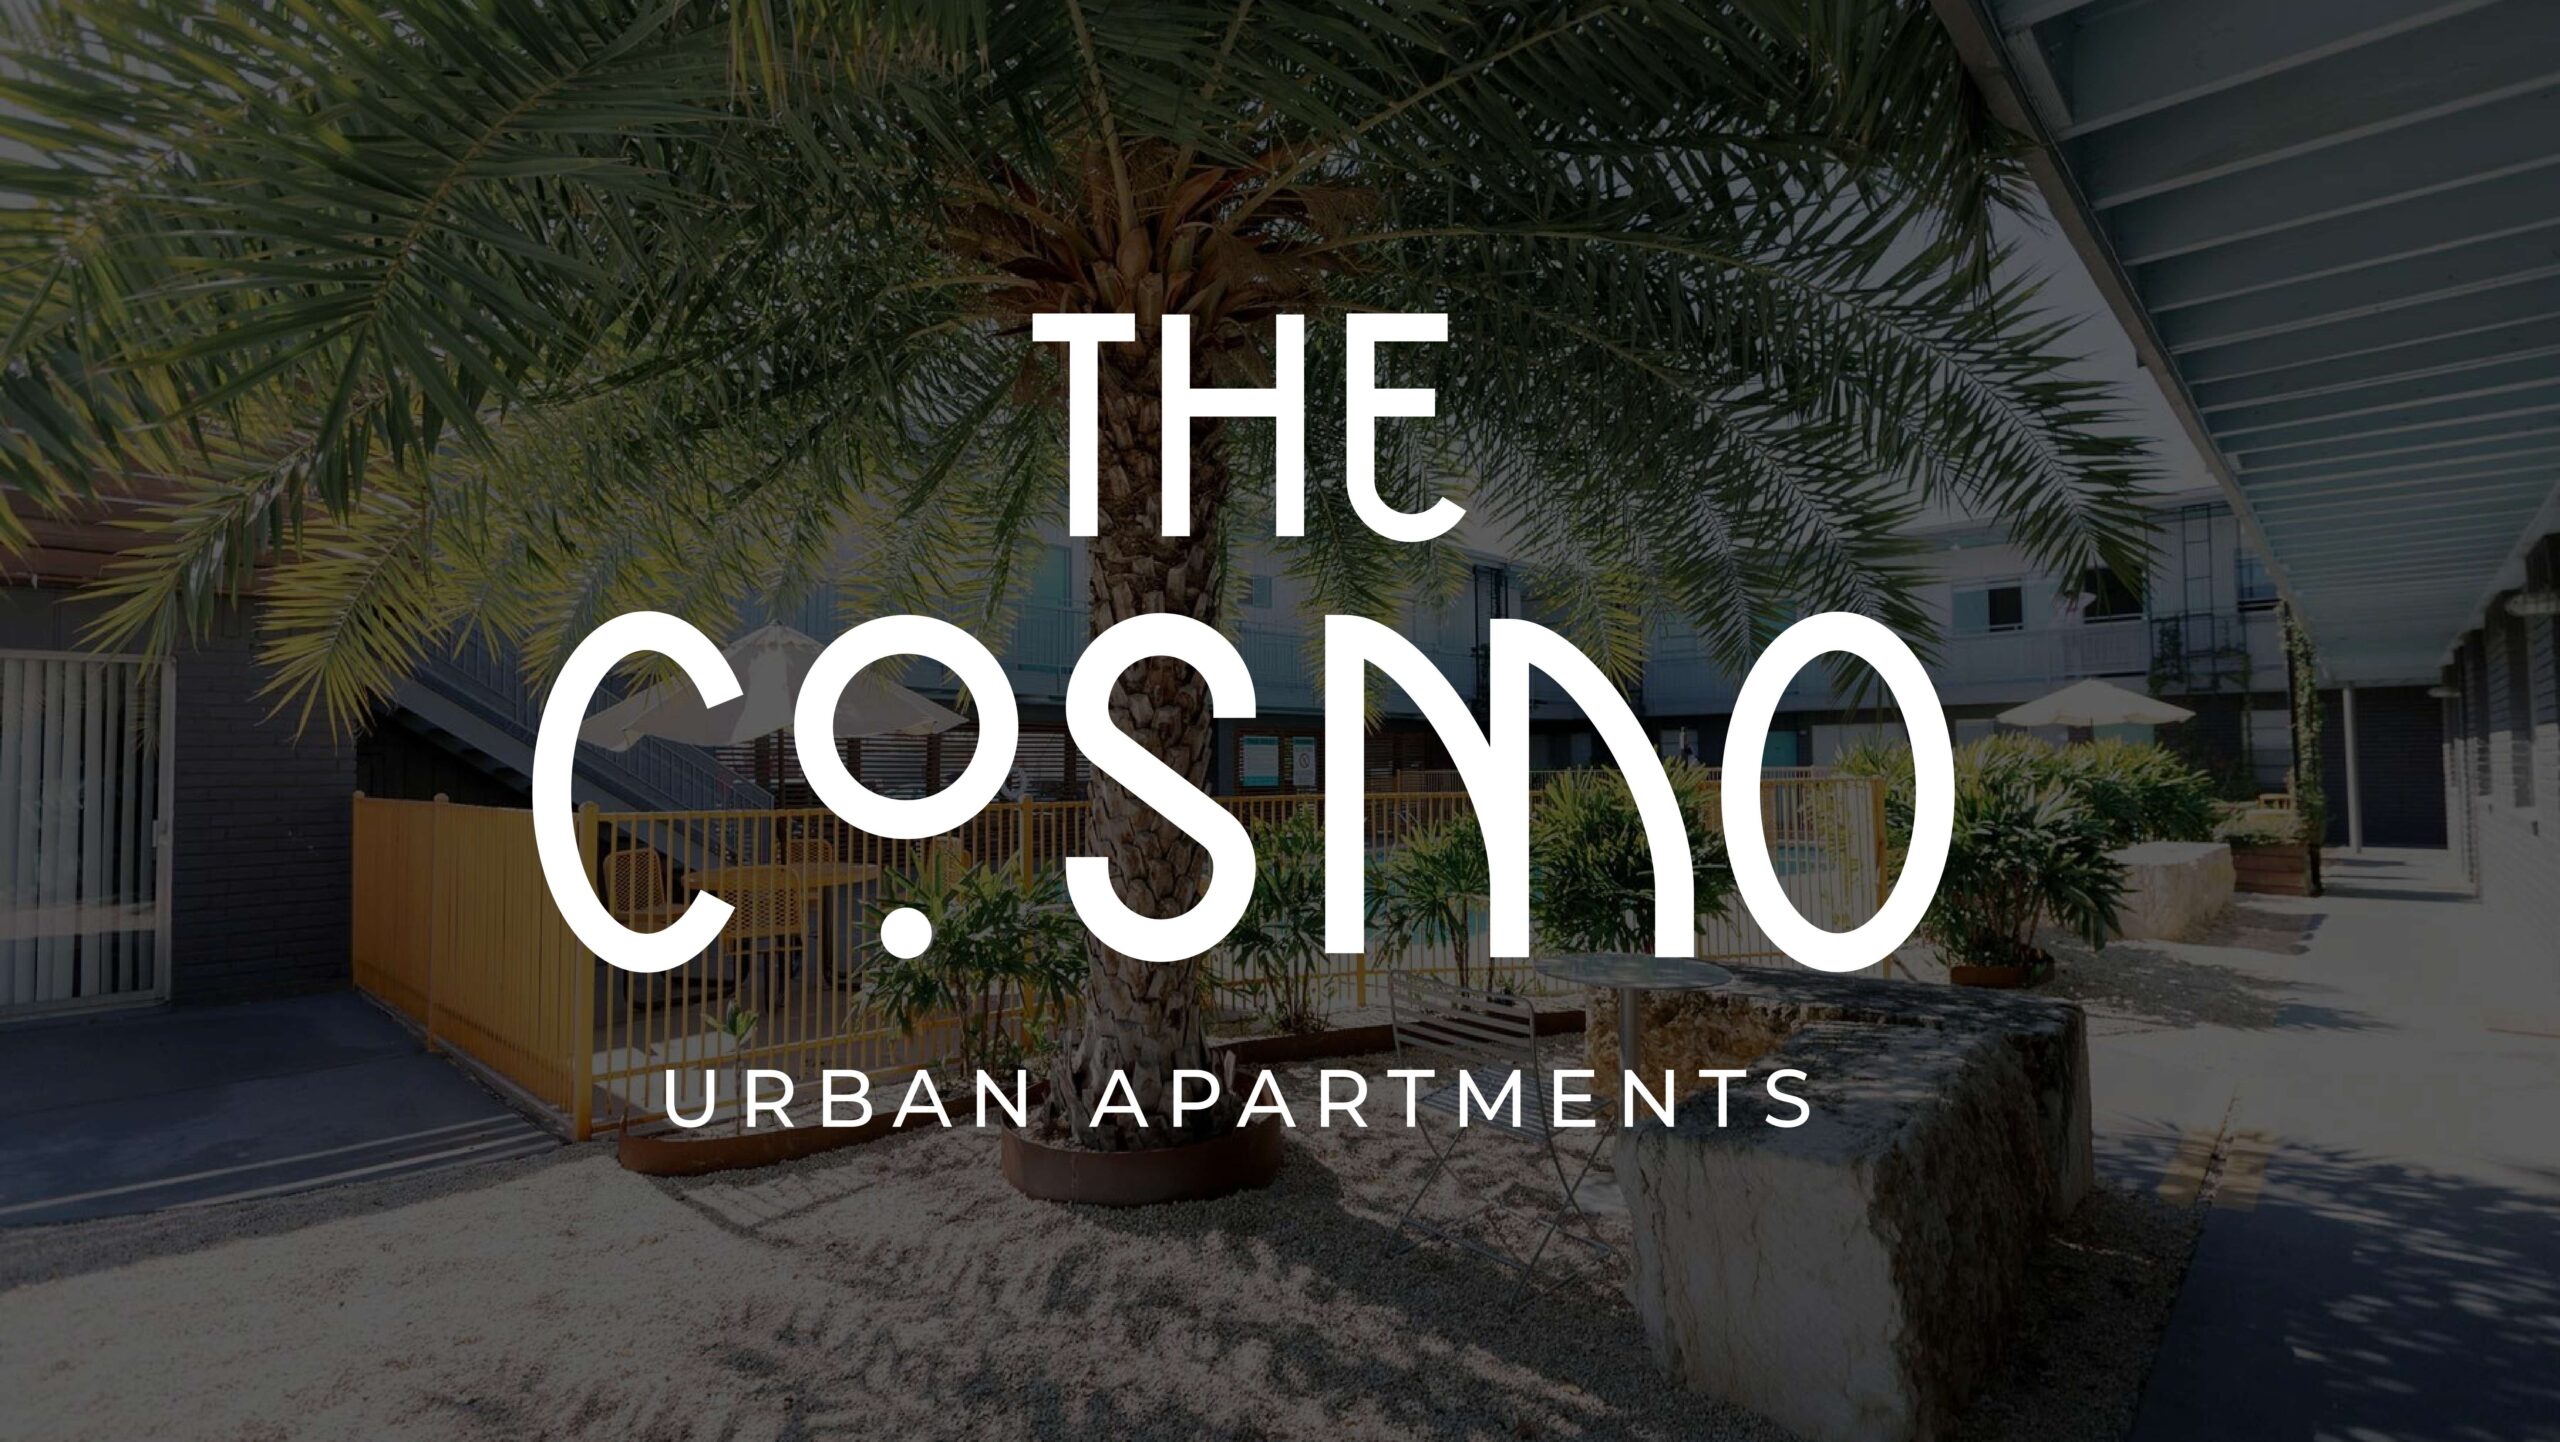 The Cosmo Urban Apartments